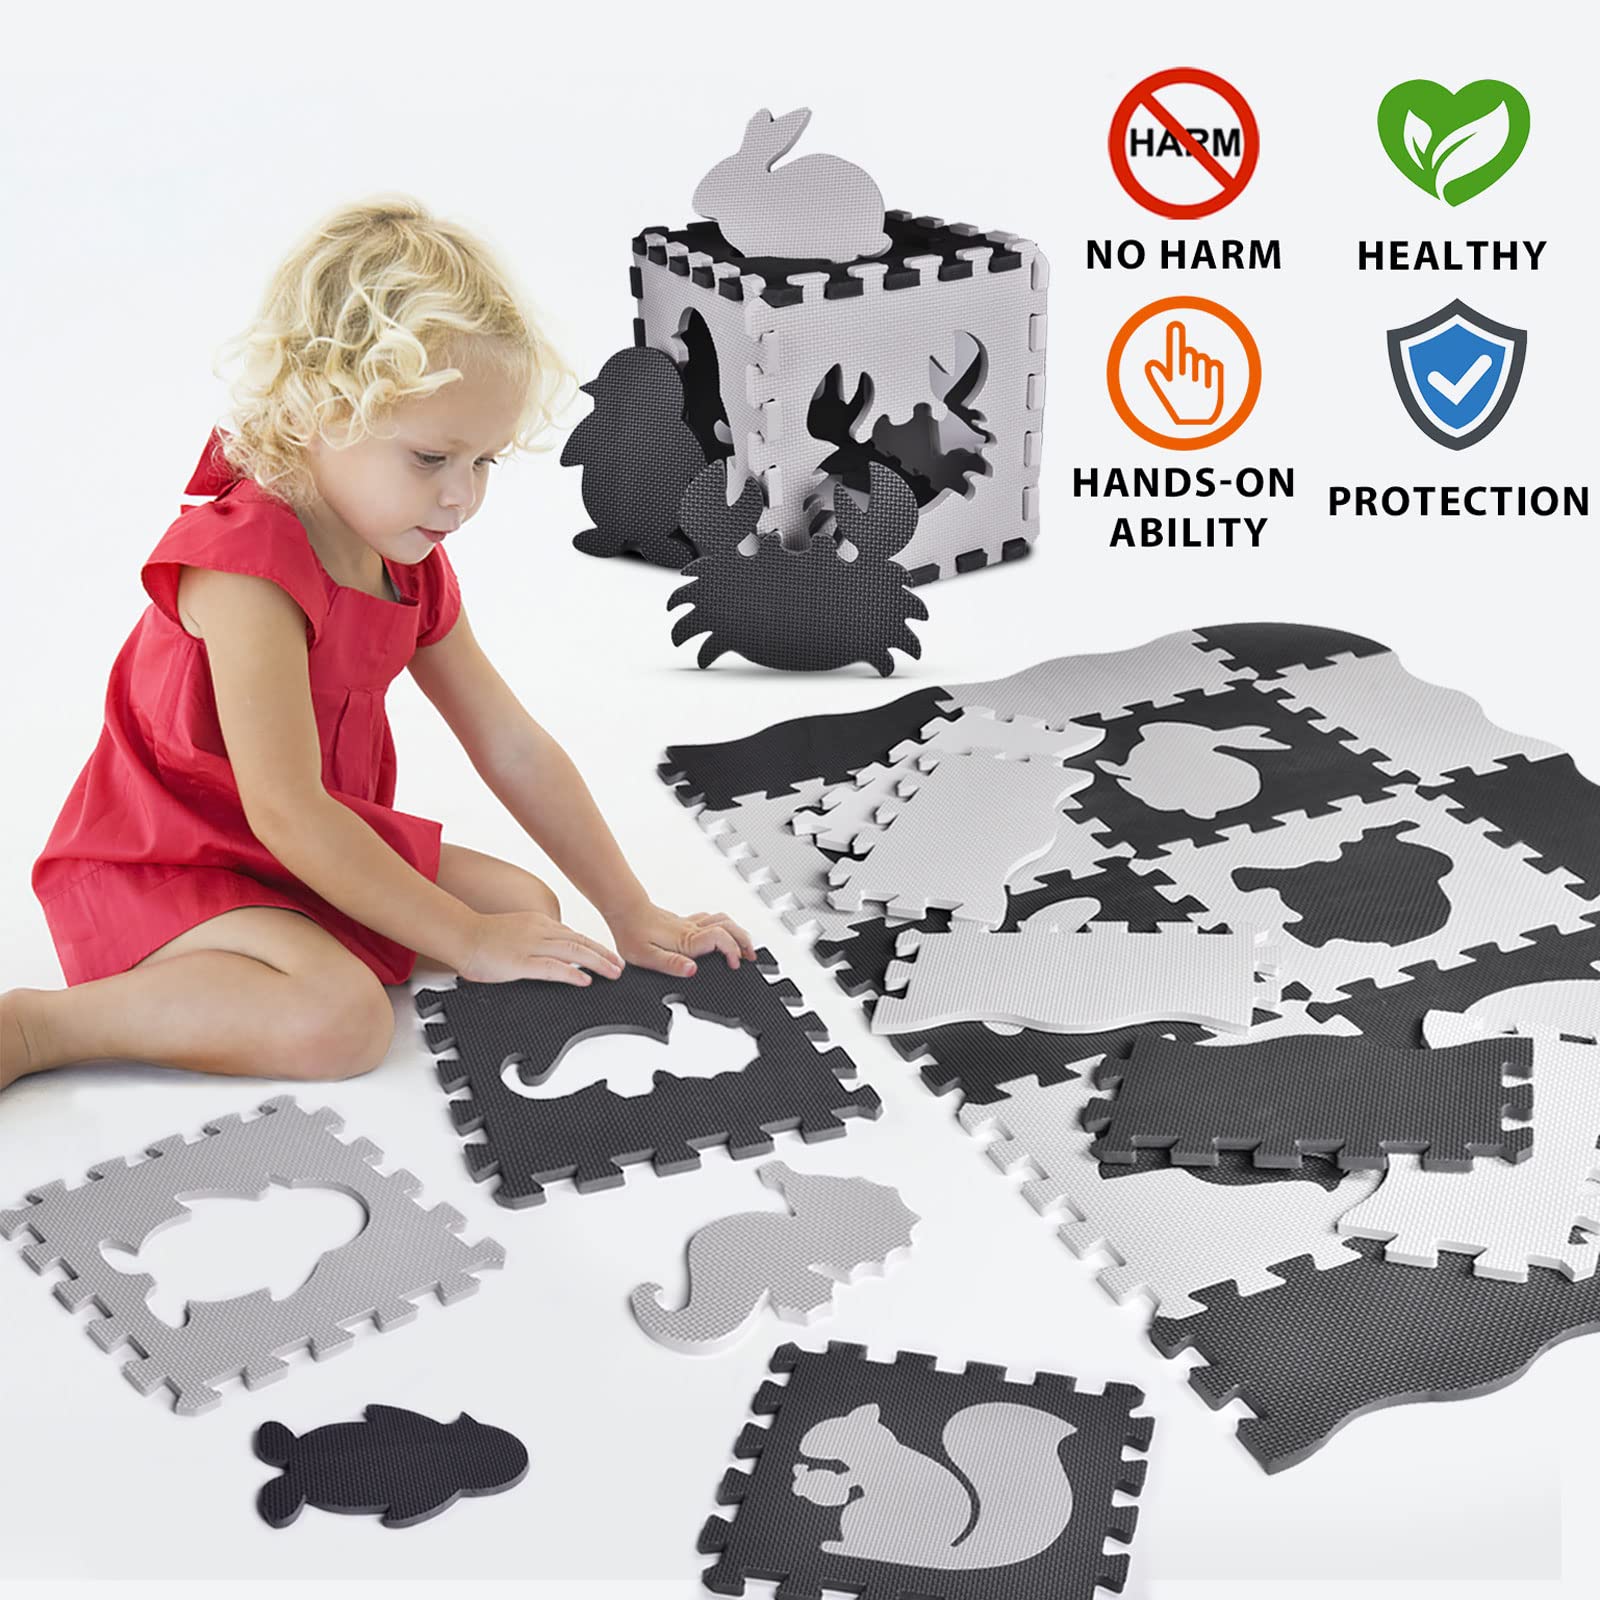 FUN LITTLE TOYS 25 PCs Baby Play Mat Interlocking Foam Floor Tiles, Animal Styles Puzzle Mat Soft Non-Toxic Crawling Mat with Fence, Activity Playmat for Toddlers Room Décor